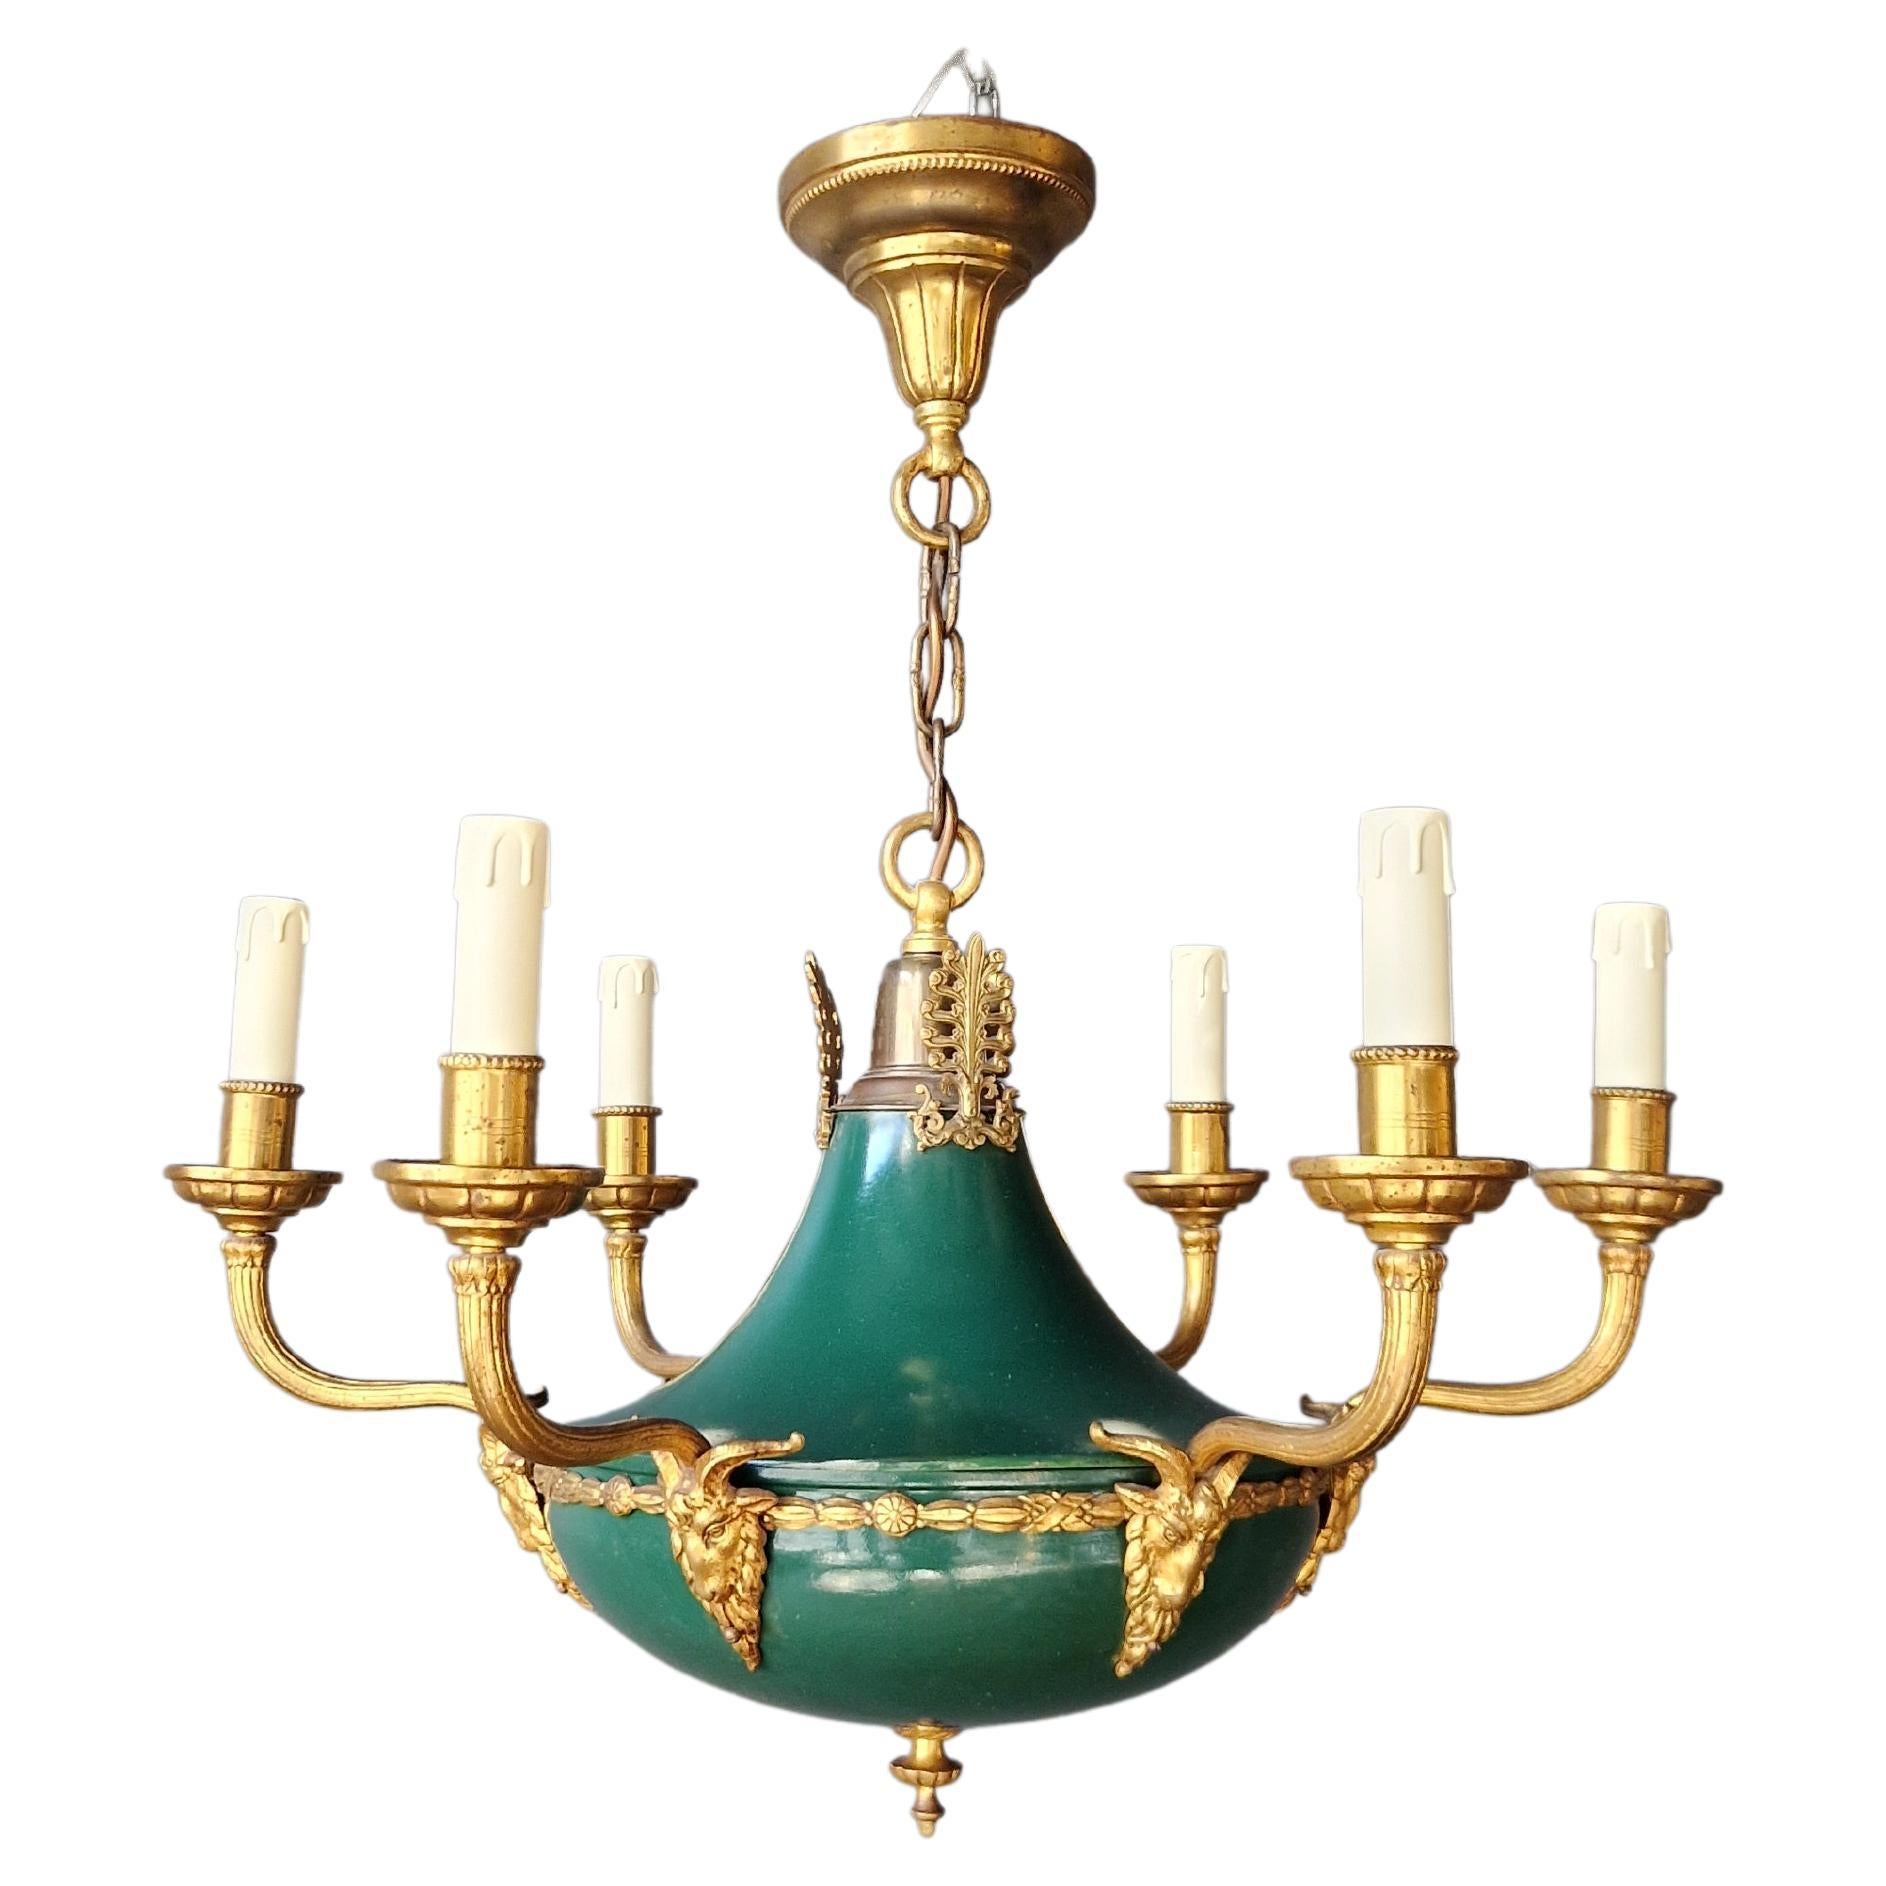 Gilt Antique Empire Lustre Neoclassical Patina Green Brass Chandelier For Sale